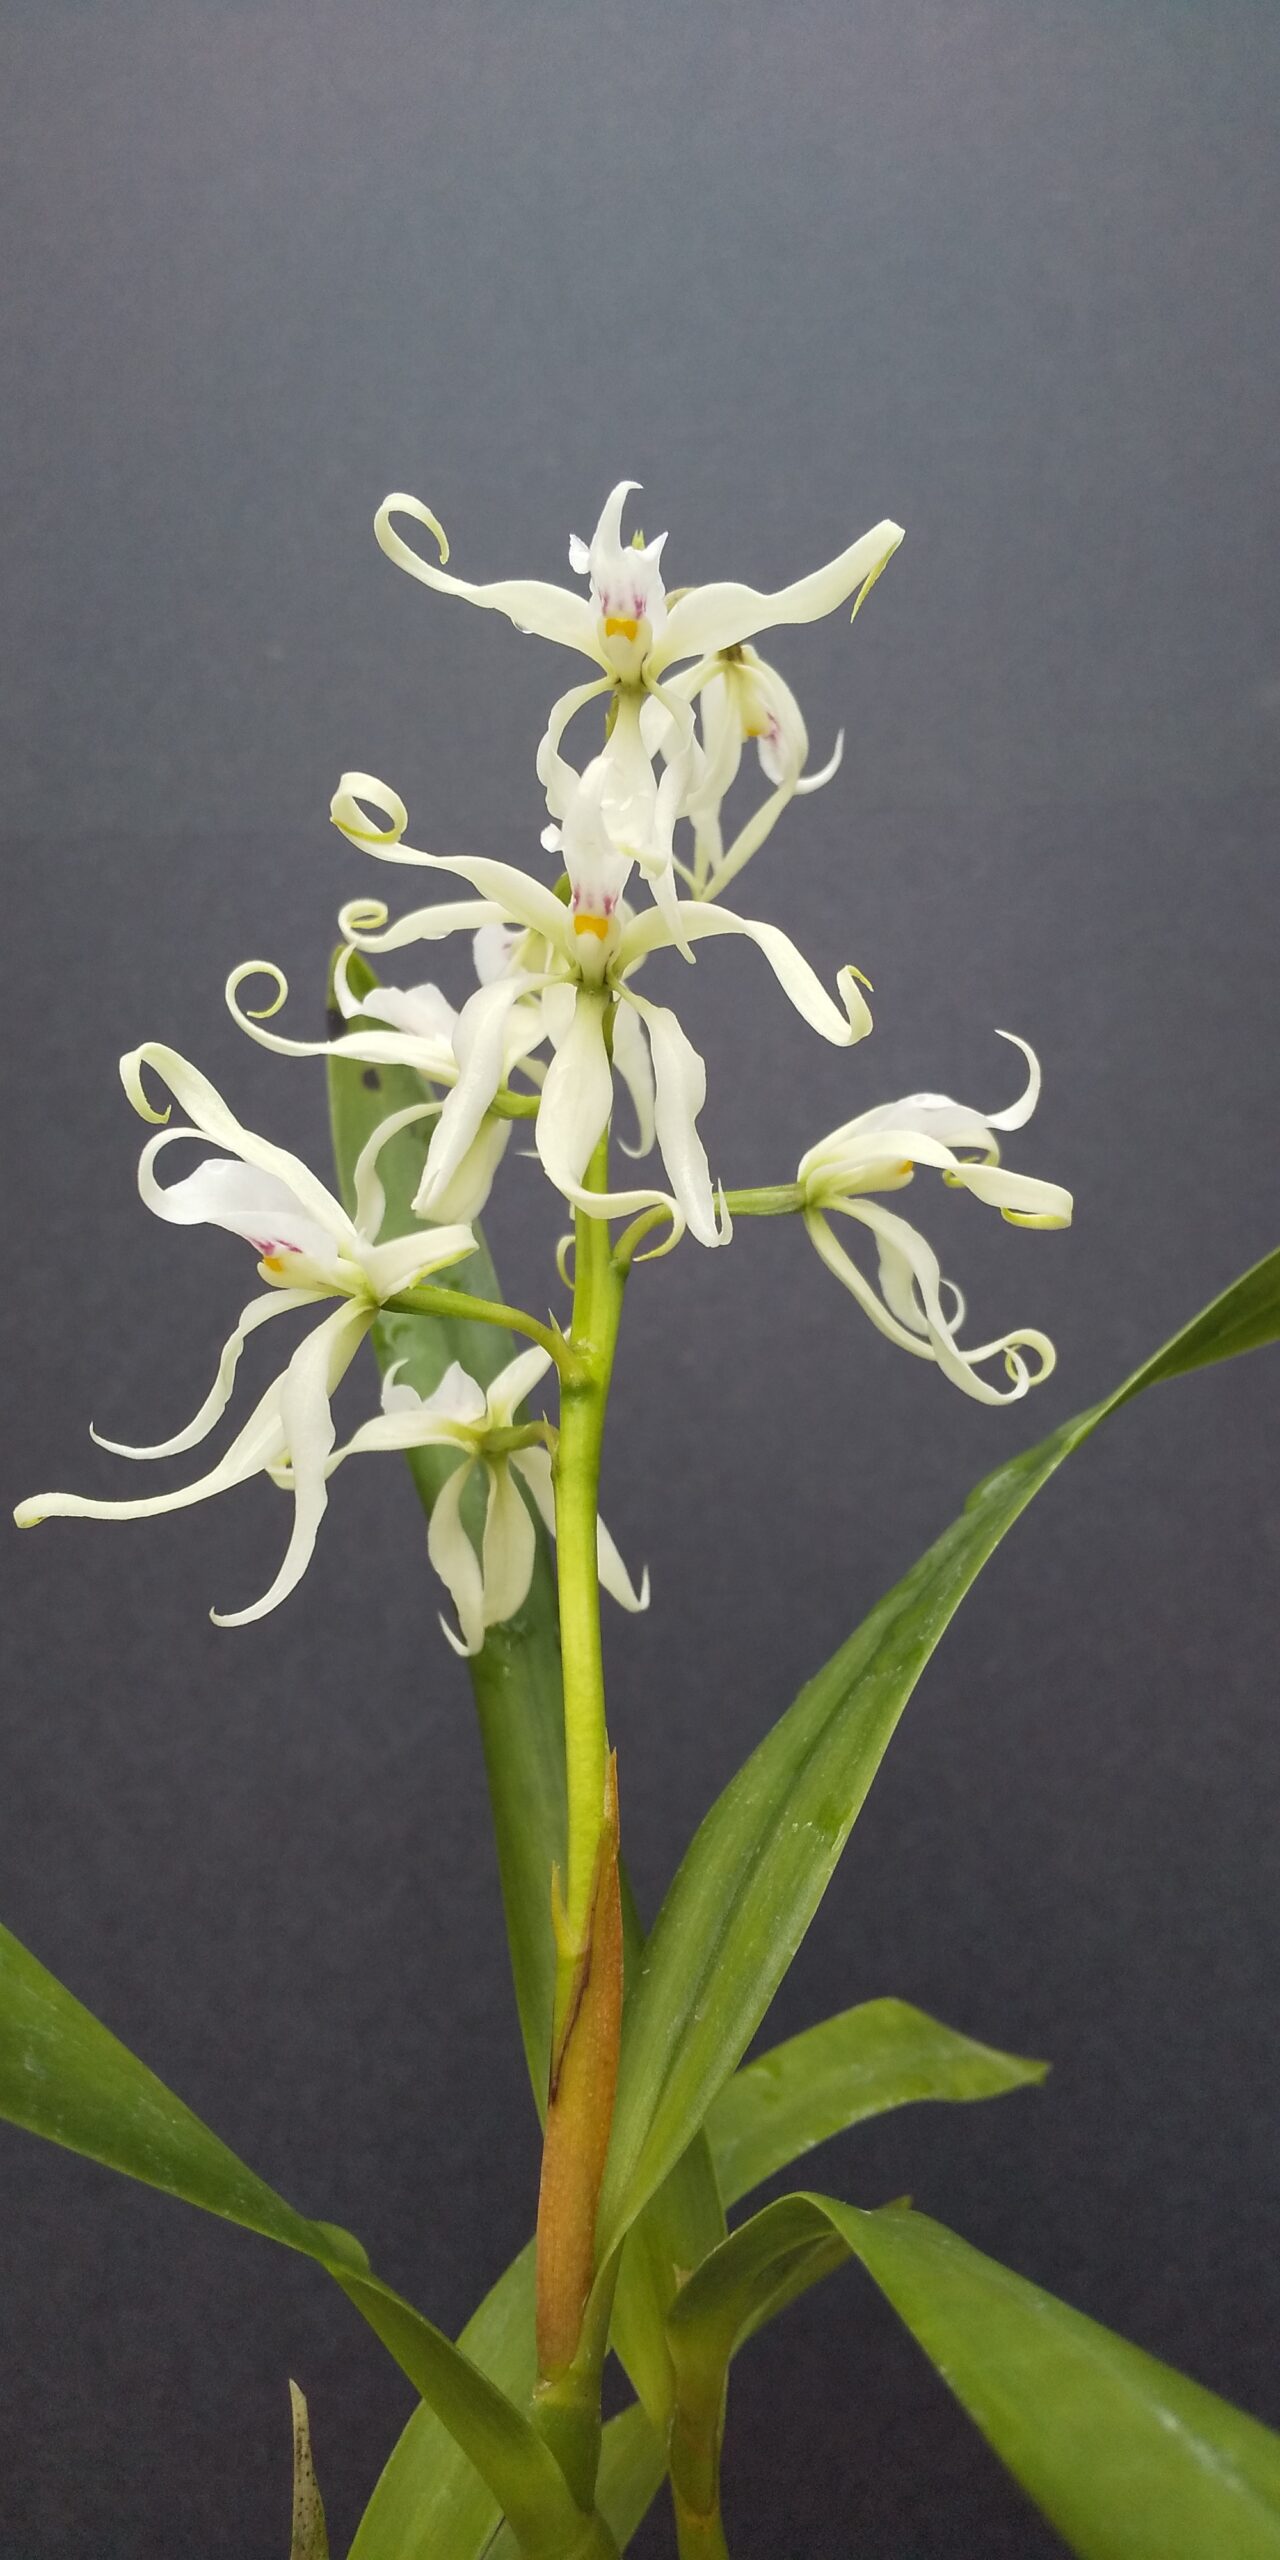 Prosthechea allemanoides　栽培者：齊藤たみ子